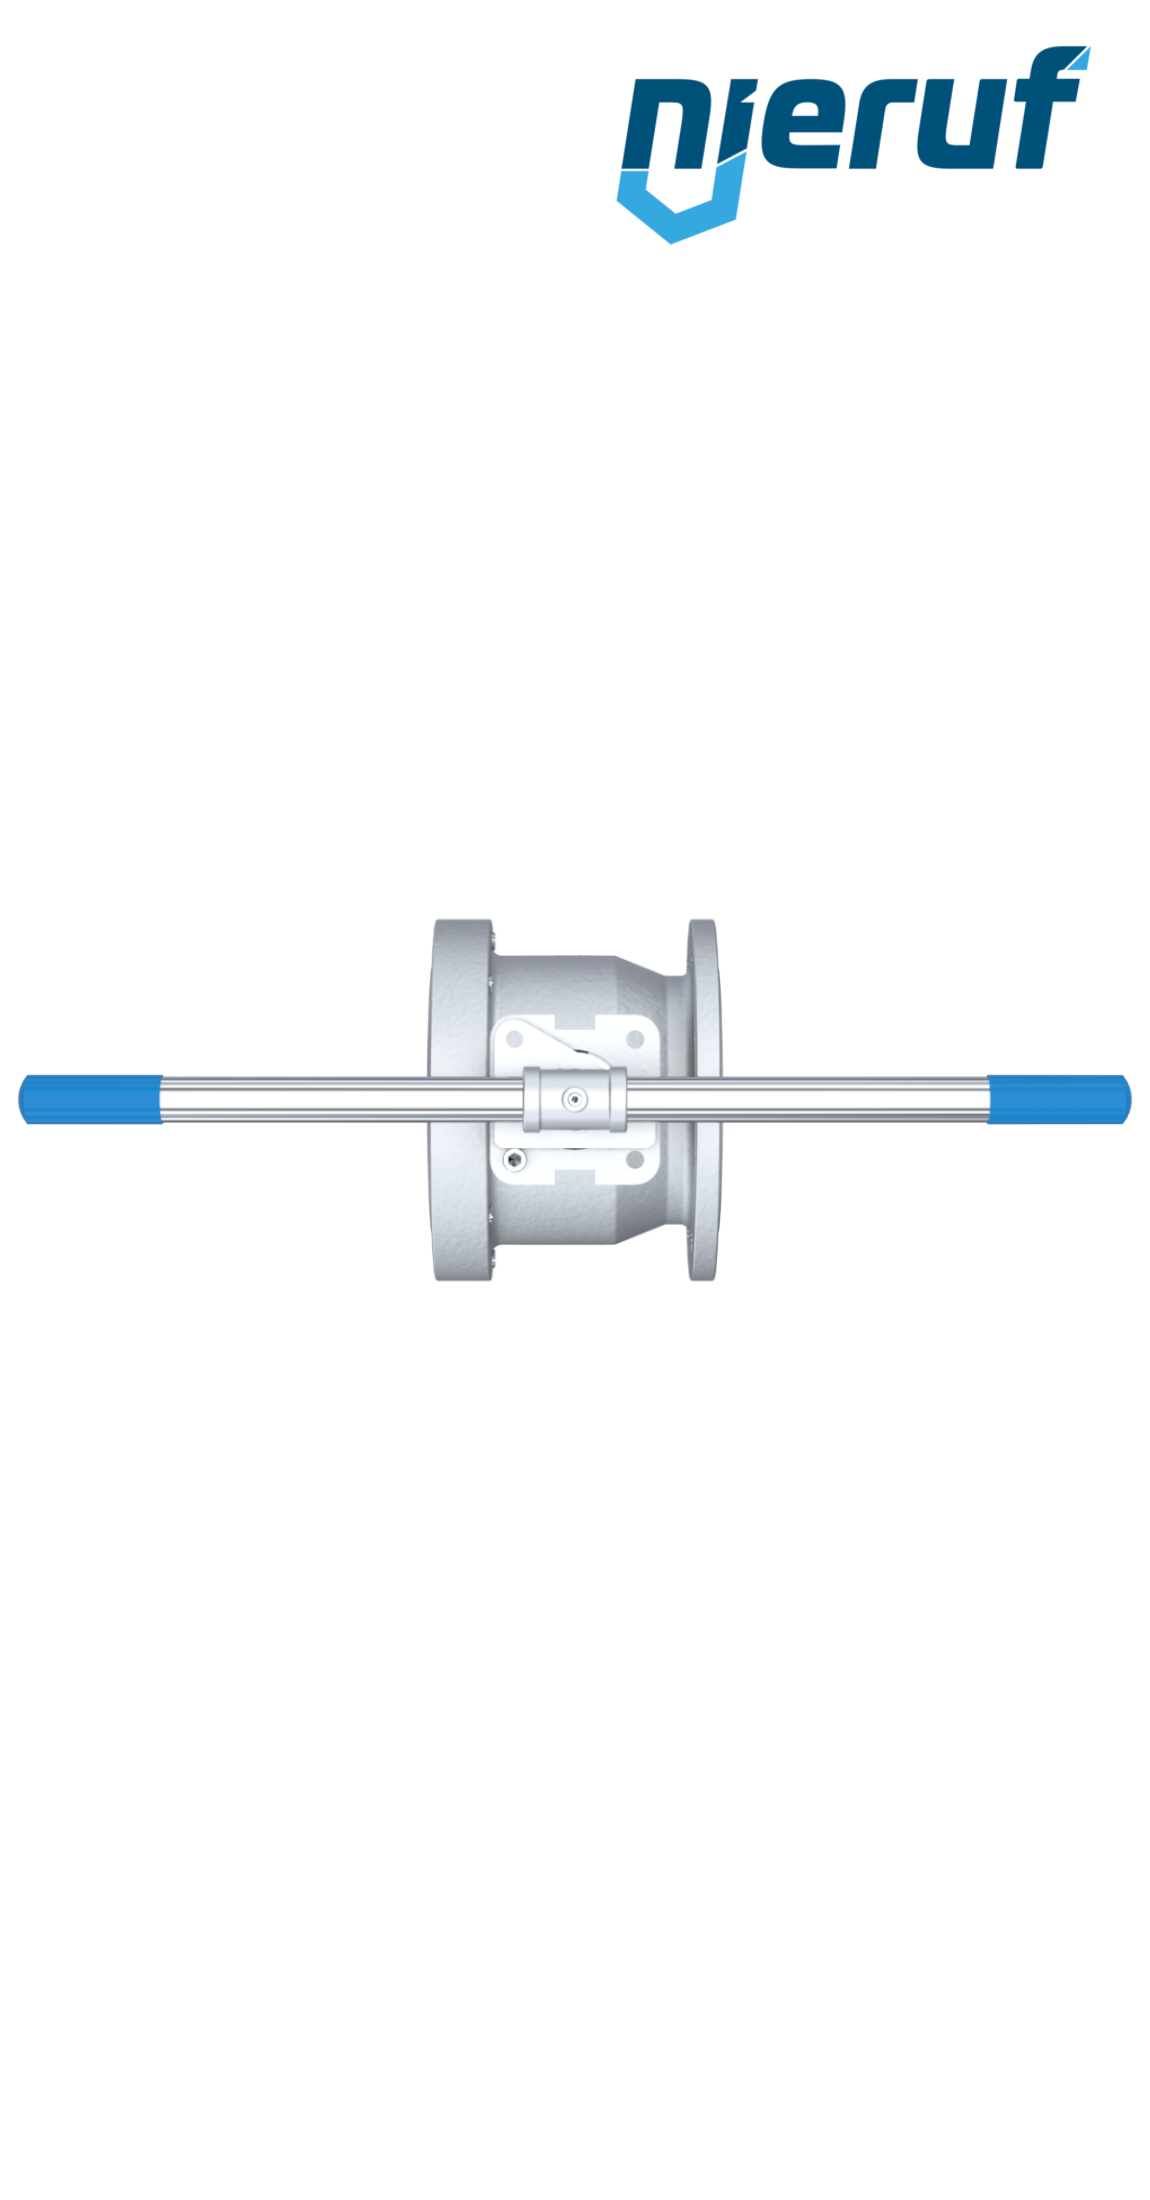 Compact ball valve DN150 PN16 FK04 stainless steel 1.4408